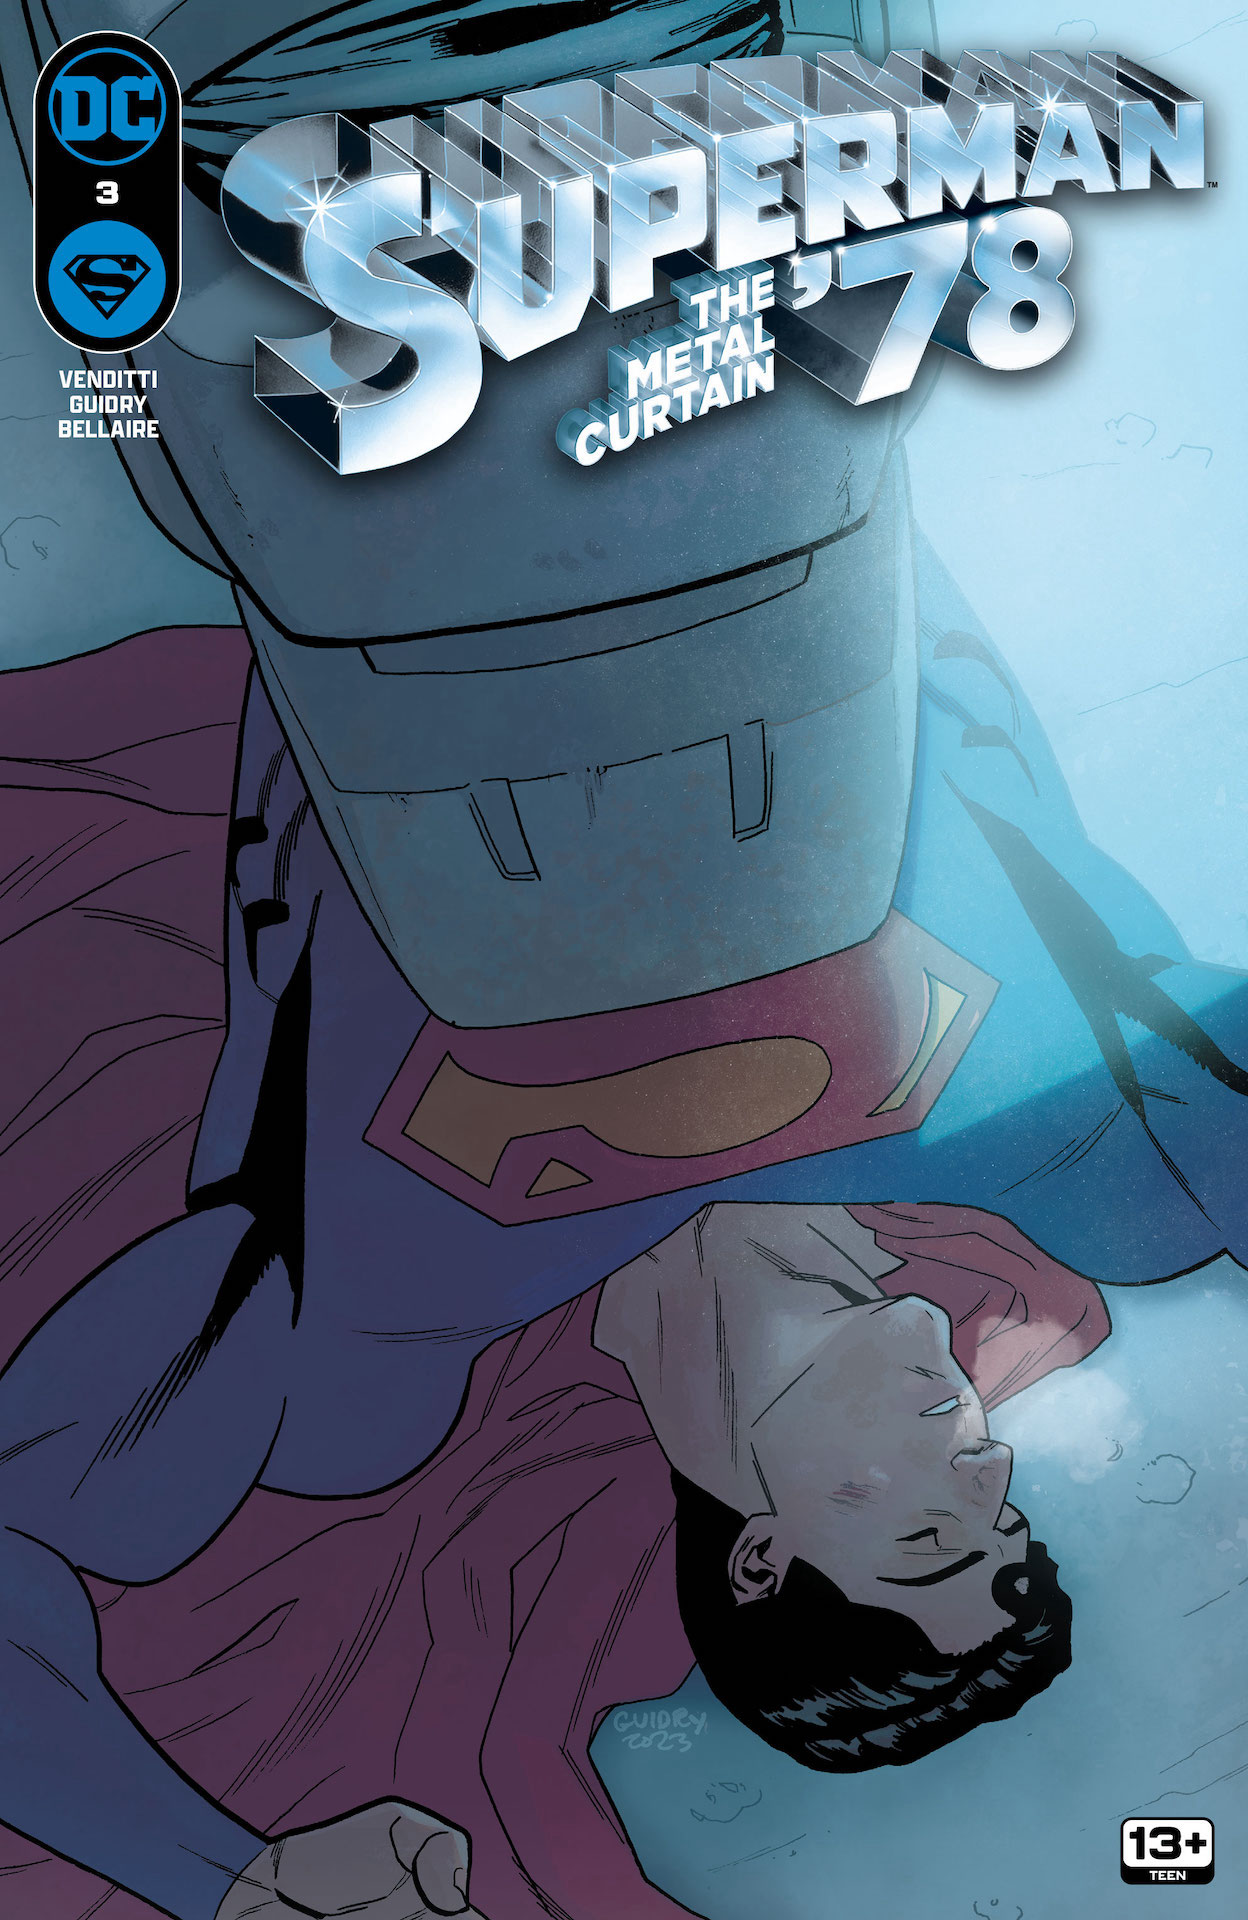 DC Preview: Superman '78: The Metal Curtain #3